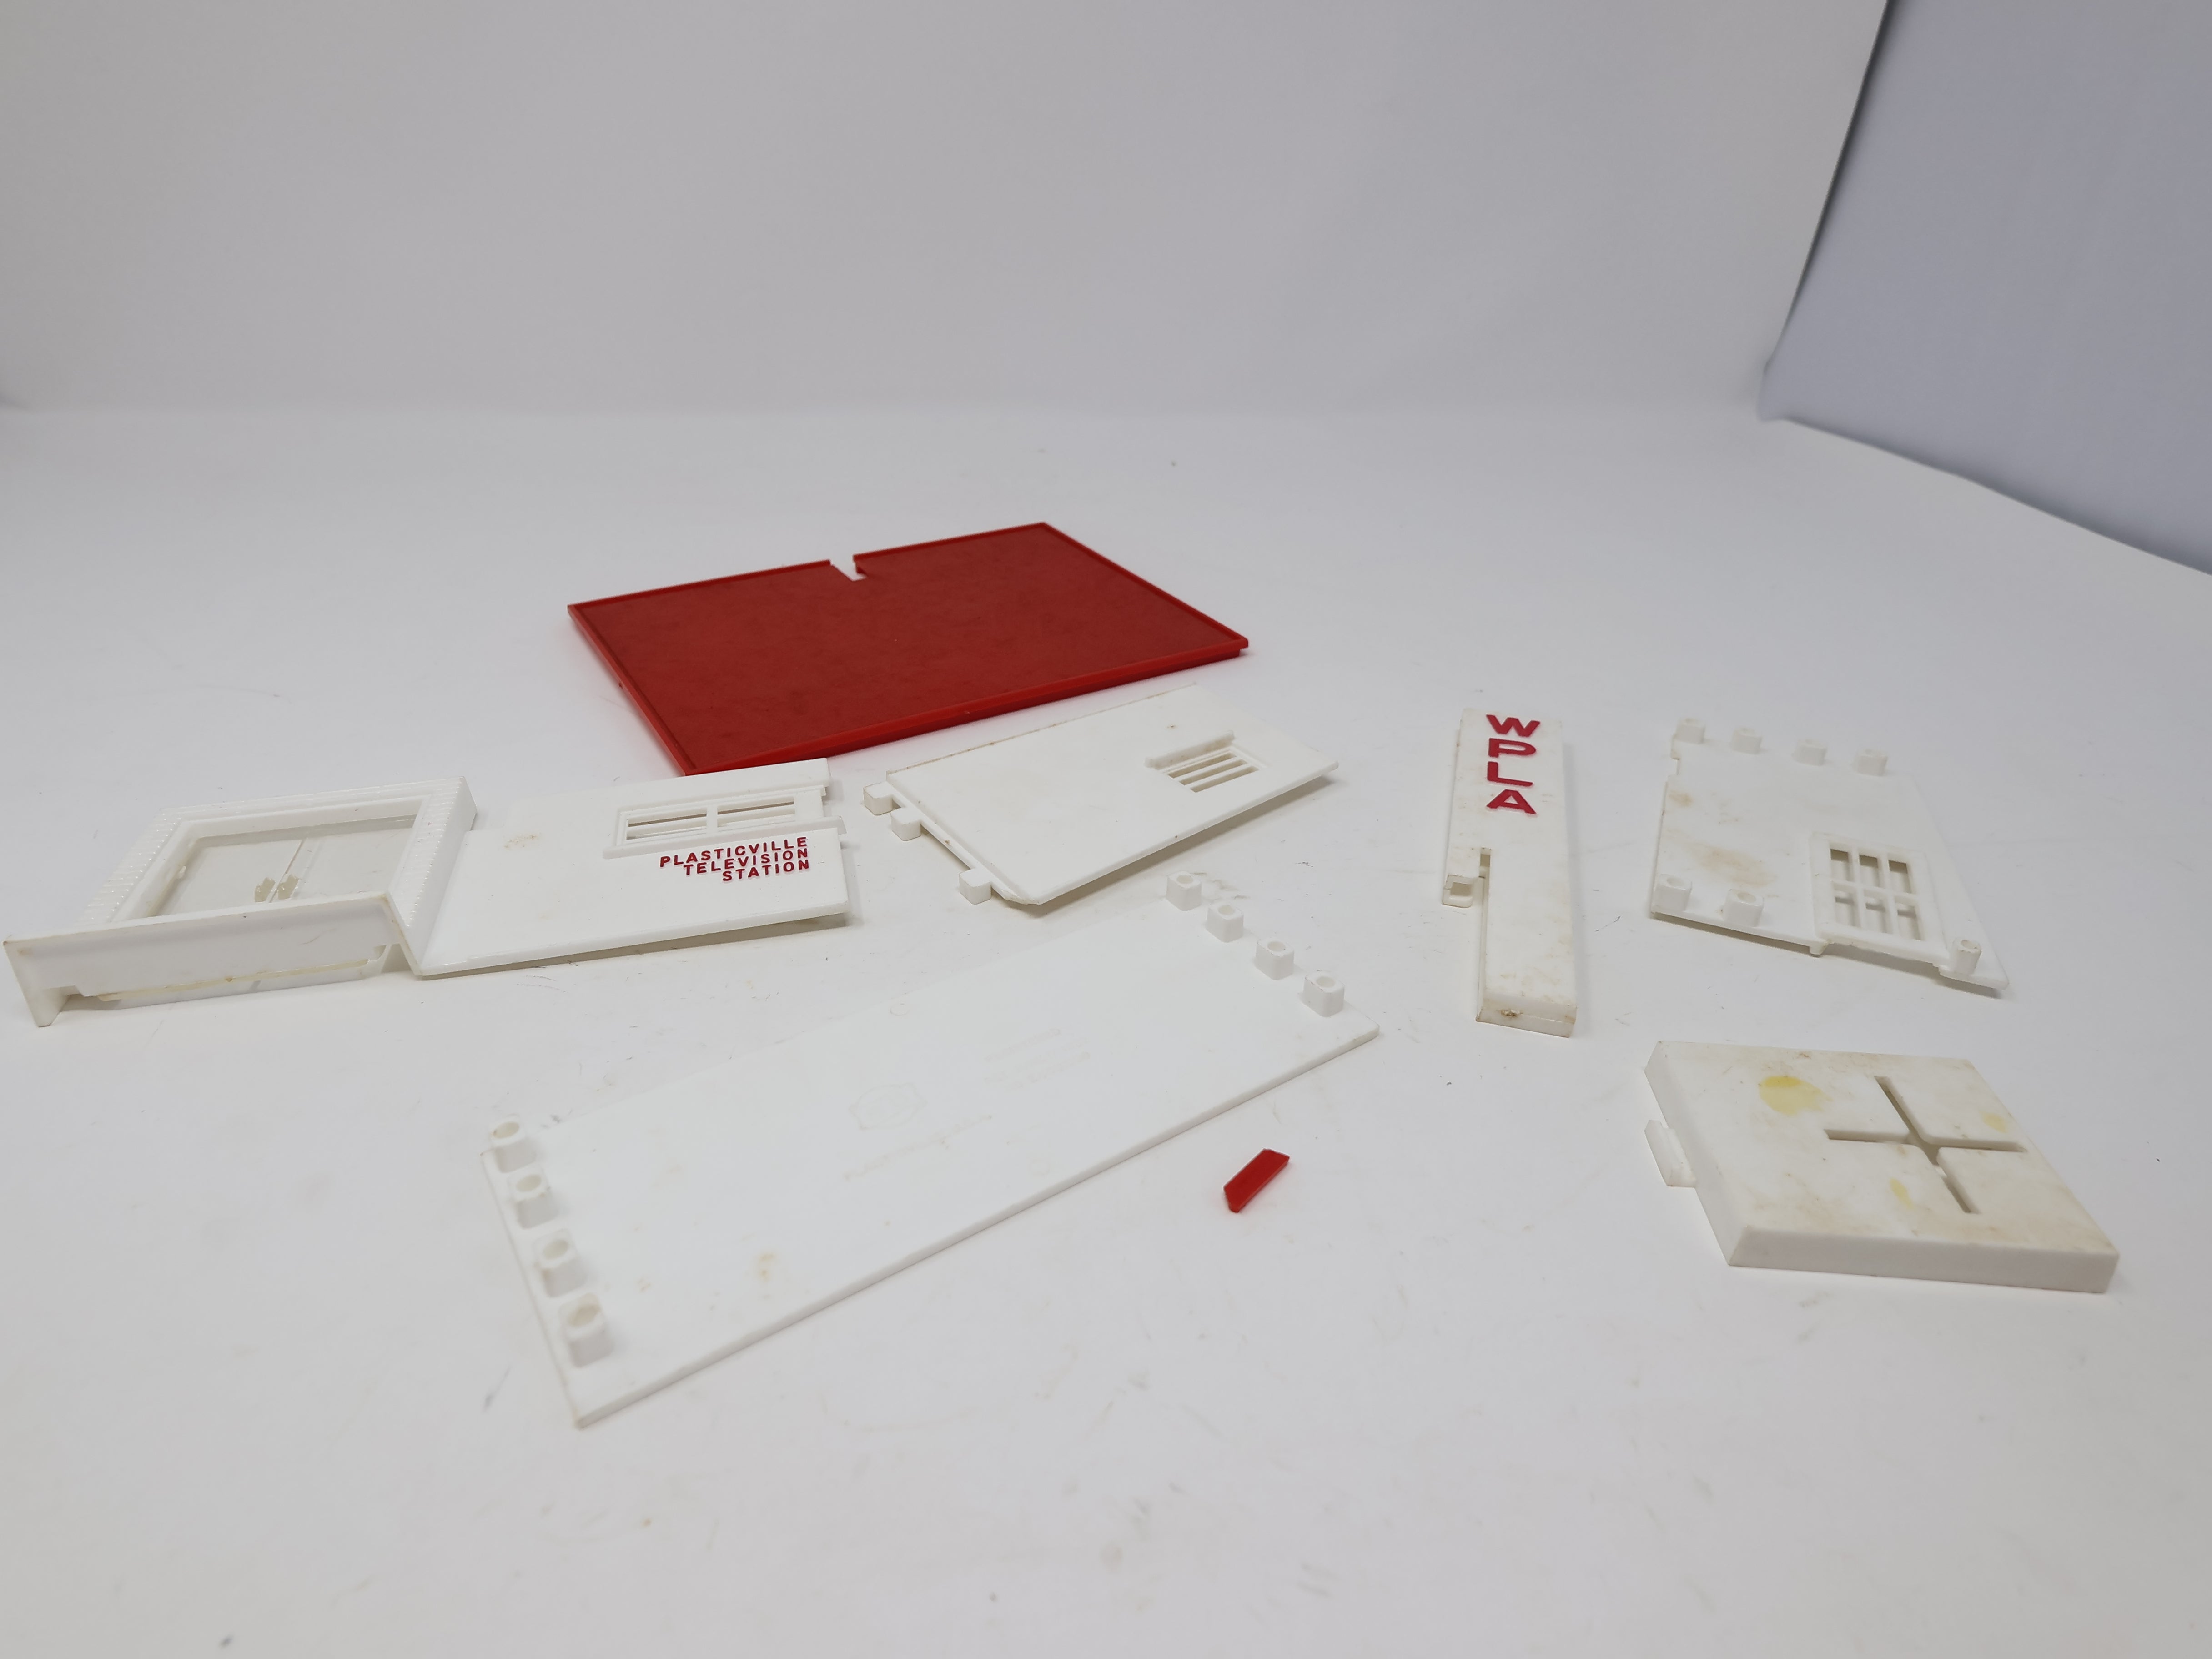 USED Bachmann Plasticville O, TV Transmitting Station (may be incomplete) (KIT)